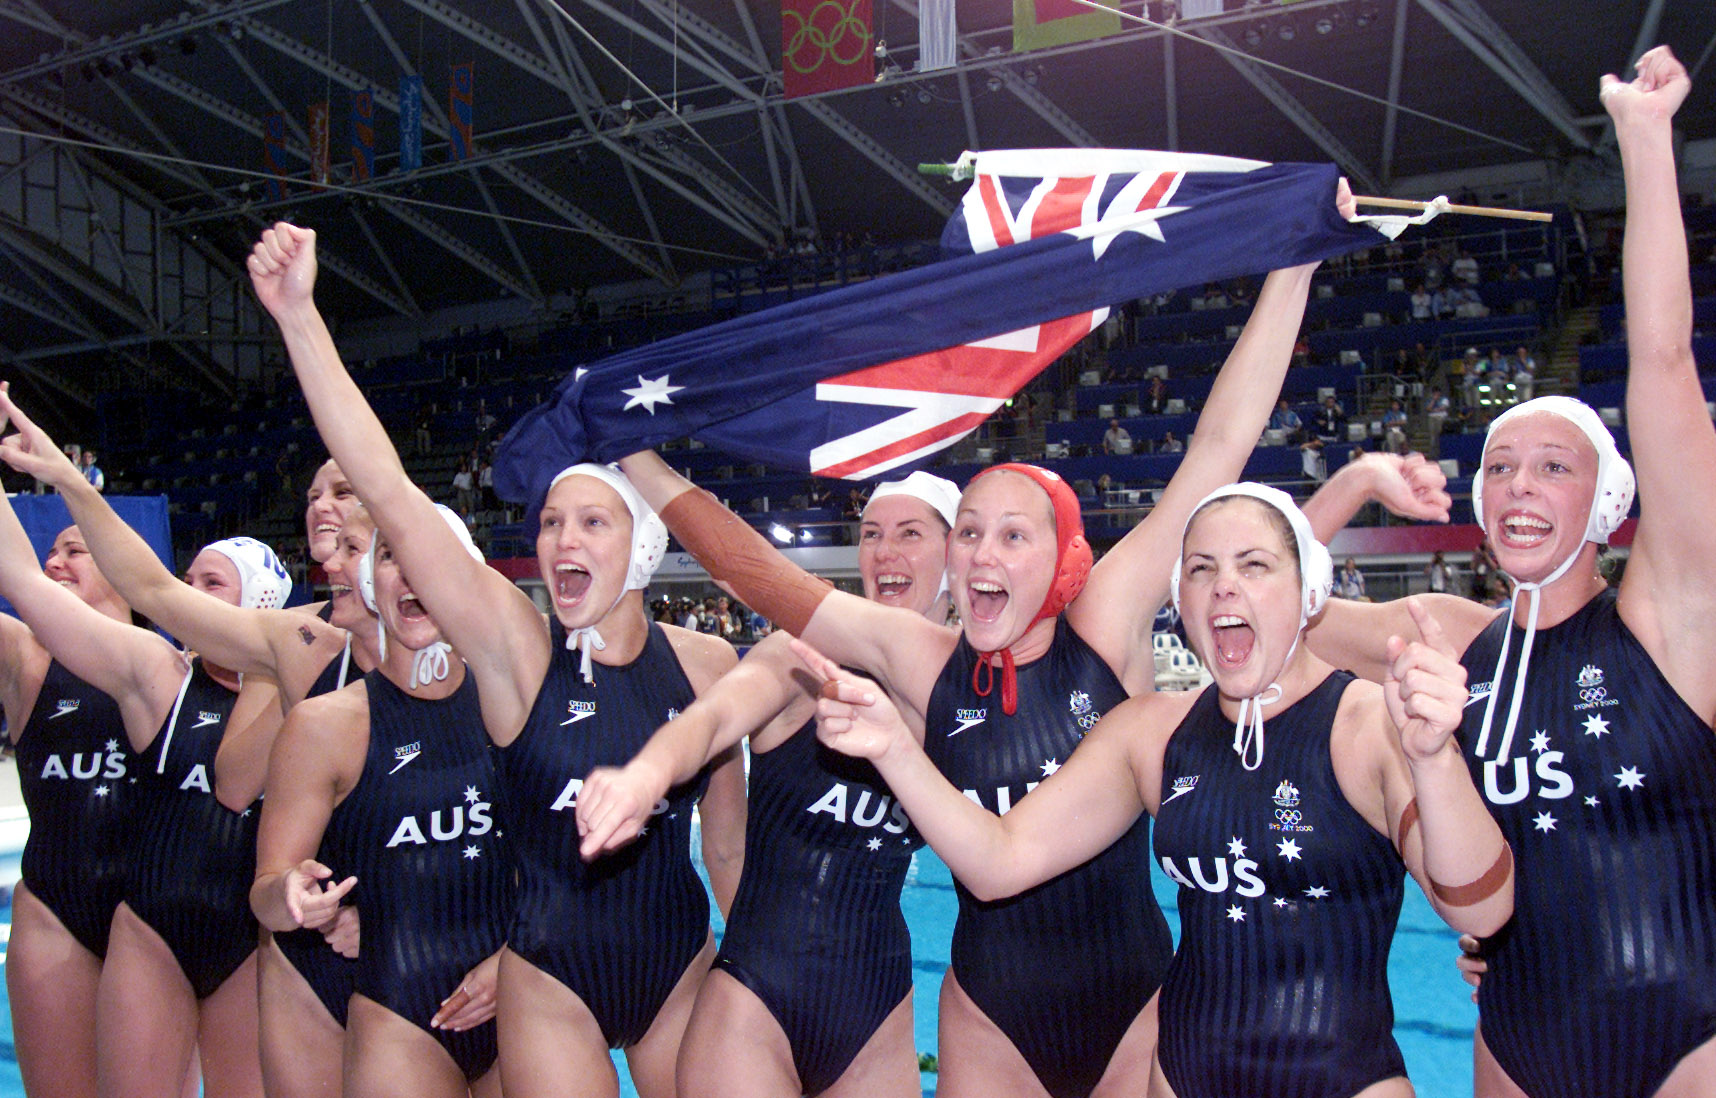 Australia wins gold in water polo at Sydney 2000 Games